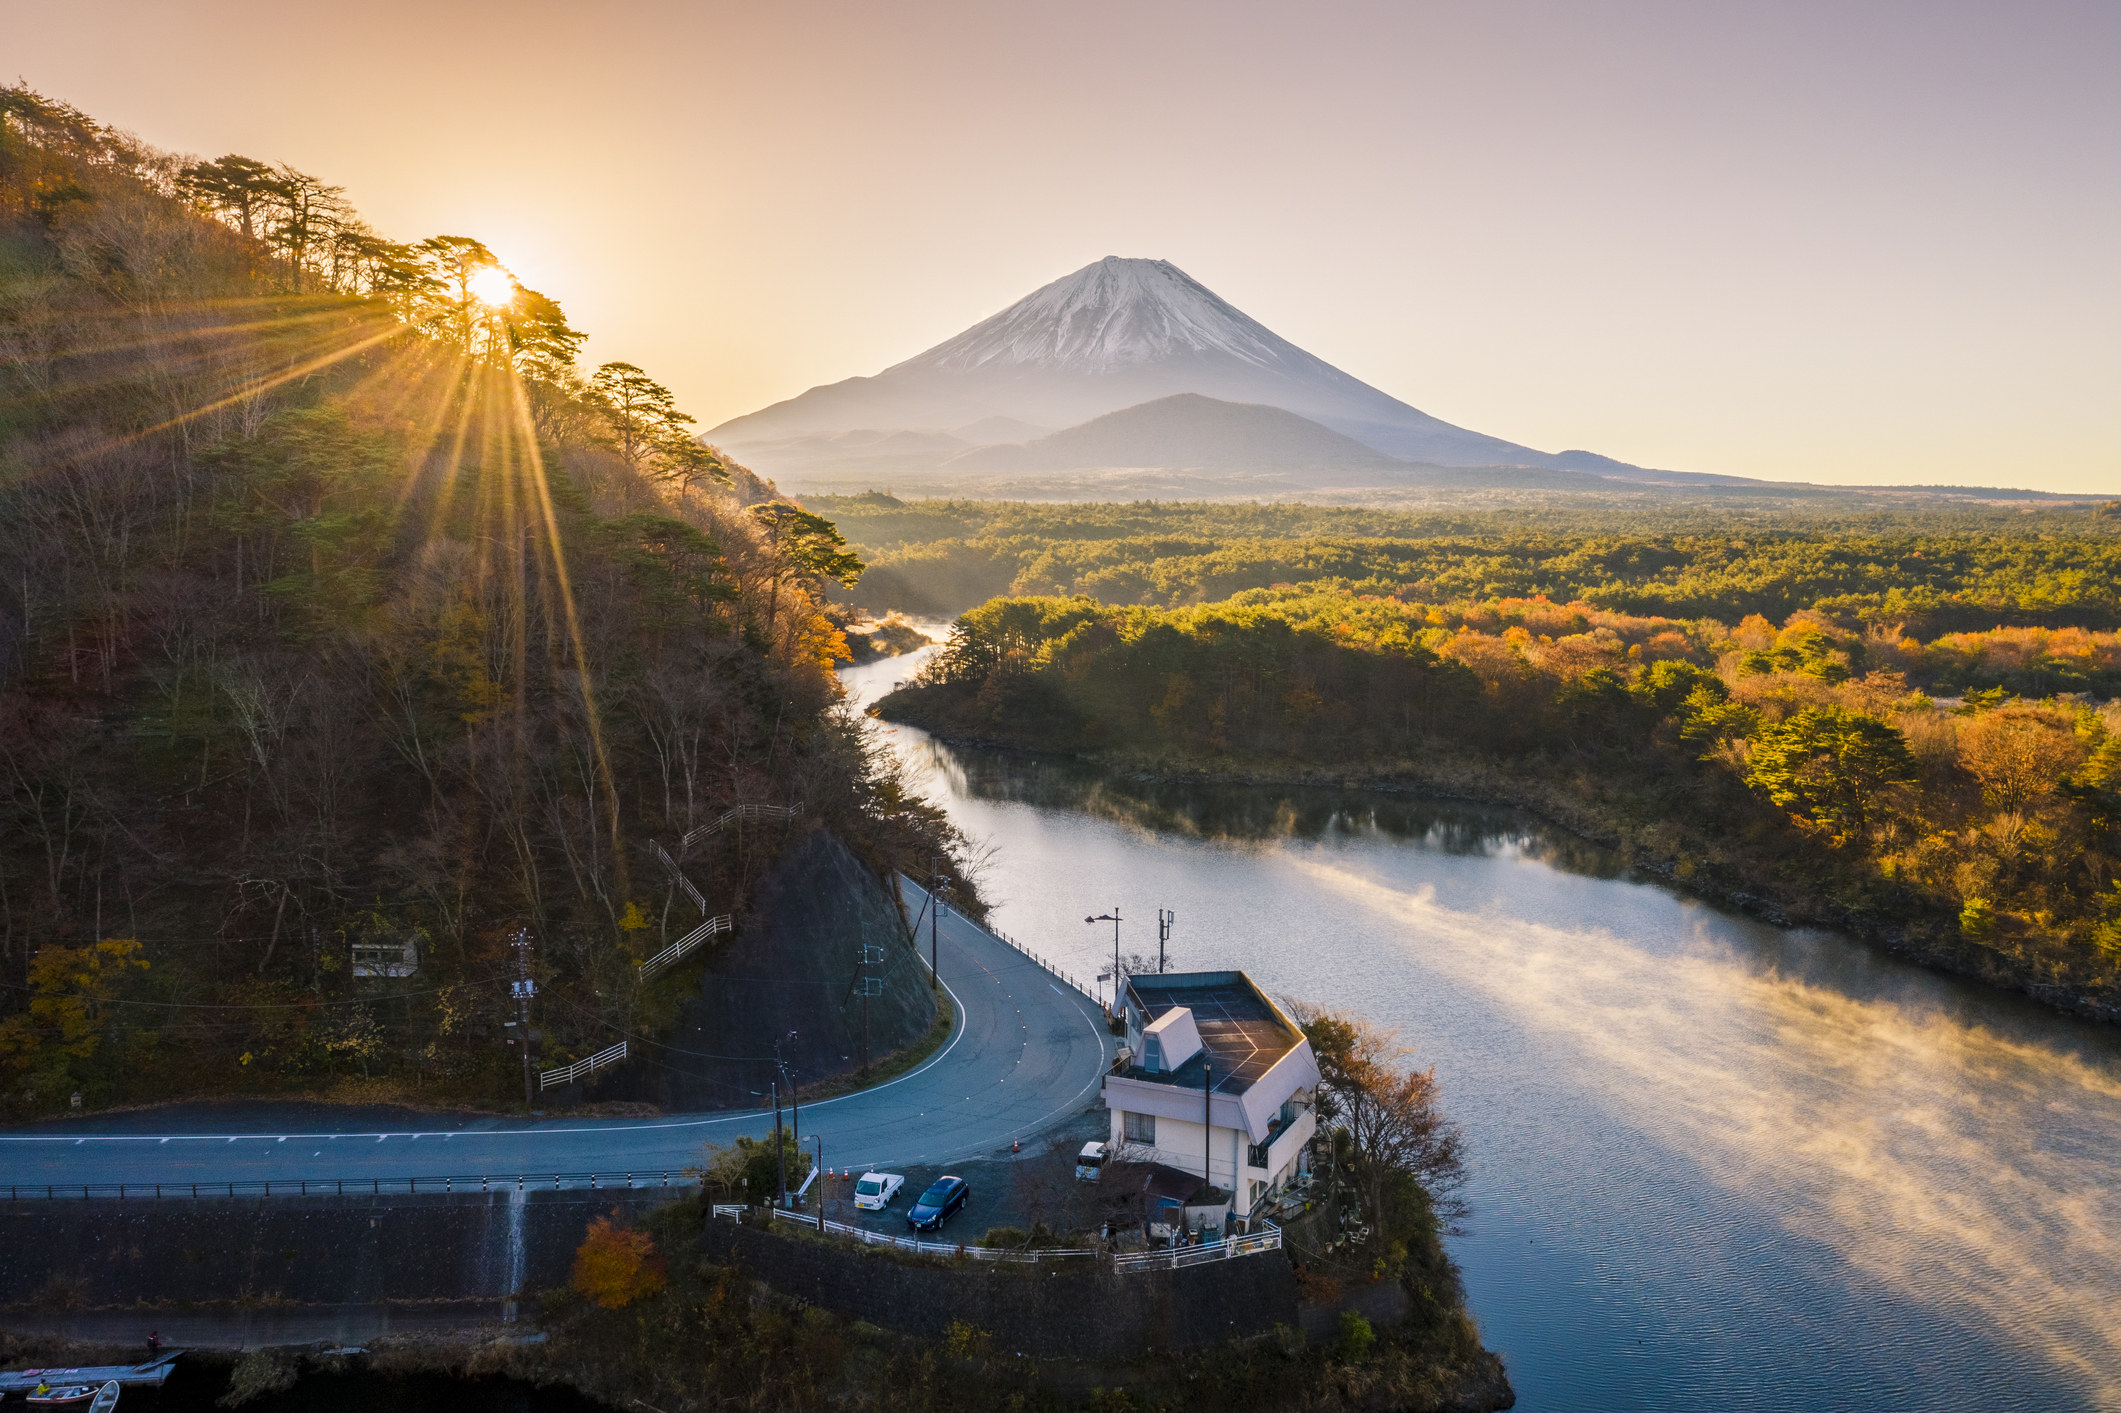 A view of Mount Fuji in the autumn at sunrise.